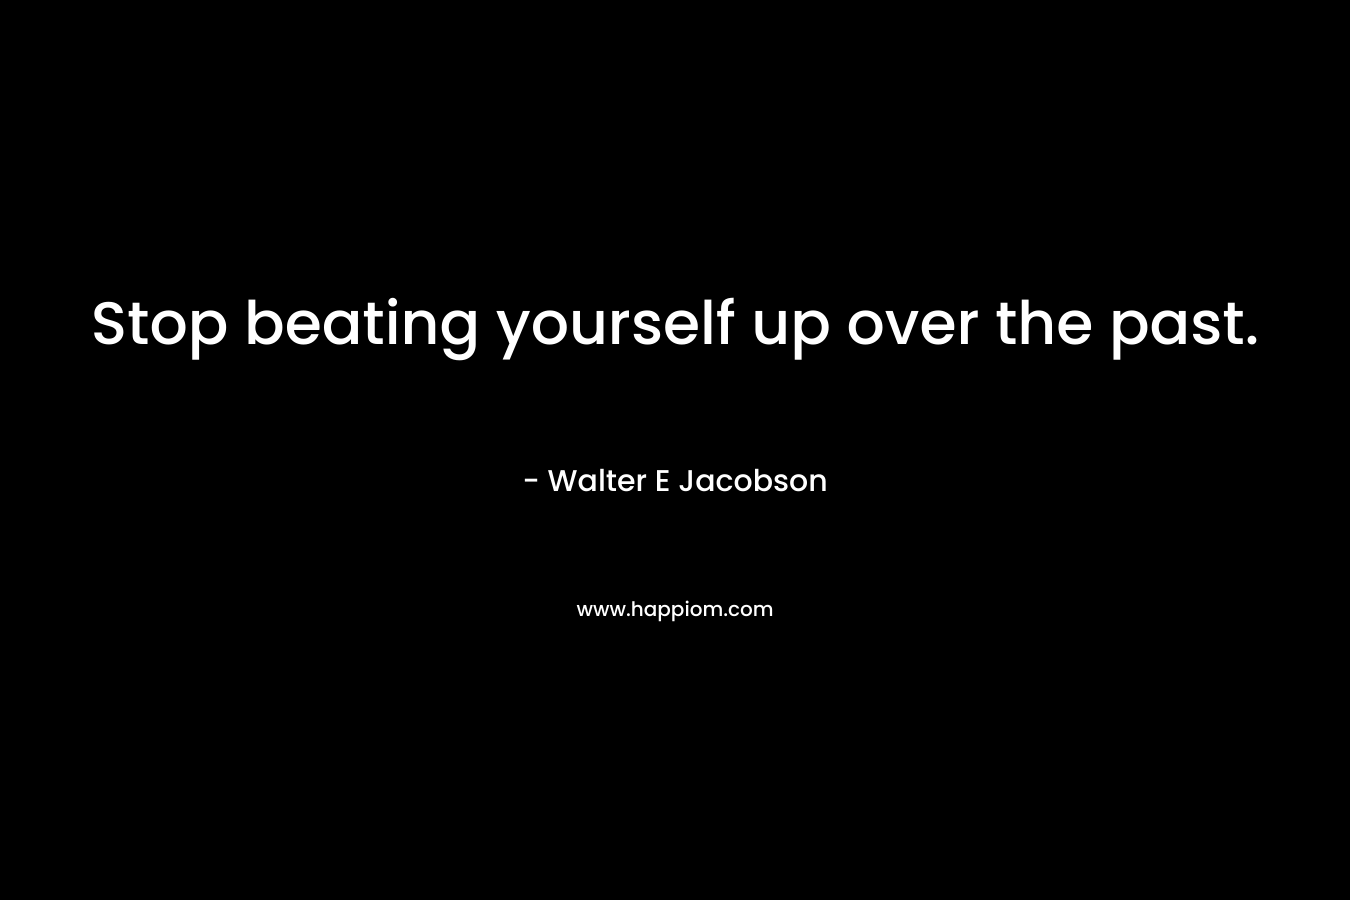 Stop beating yourself up over the past.